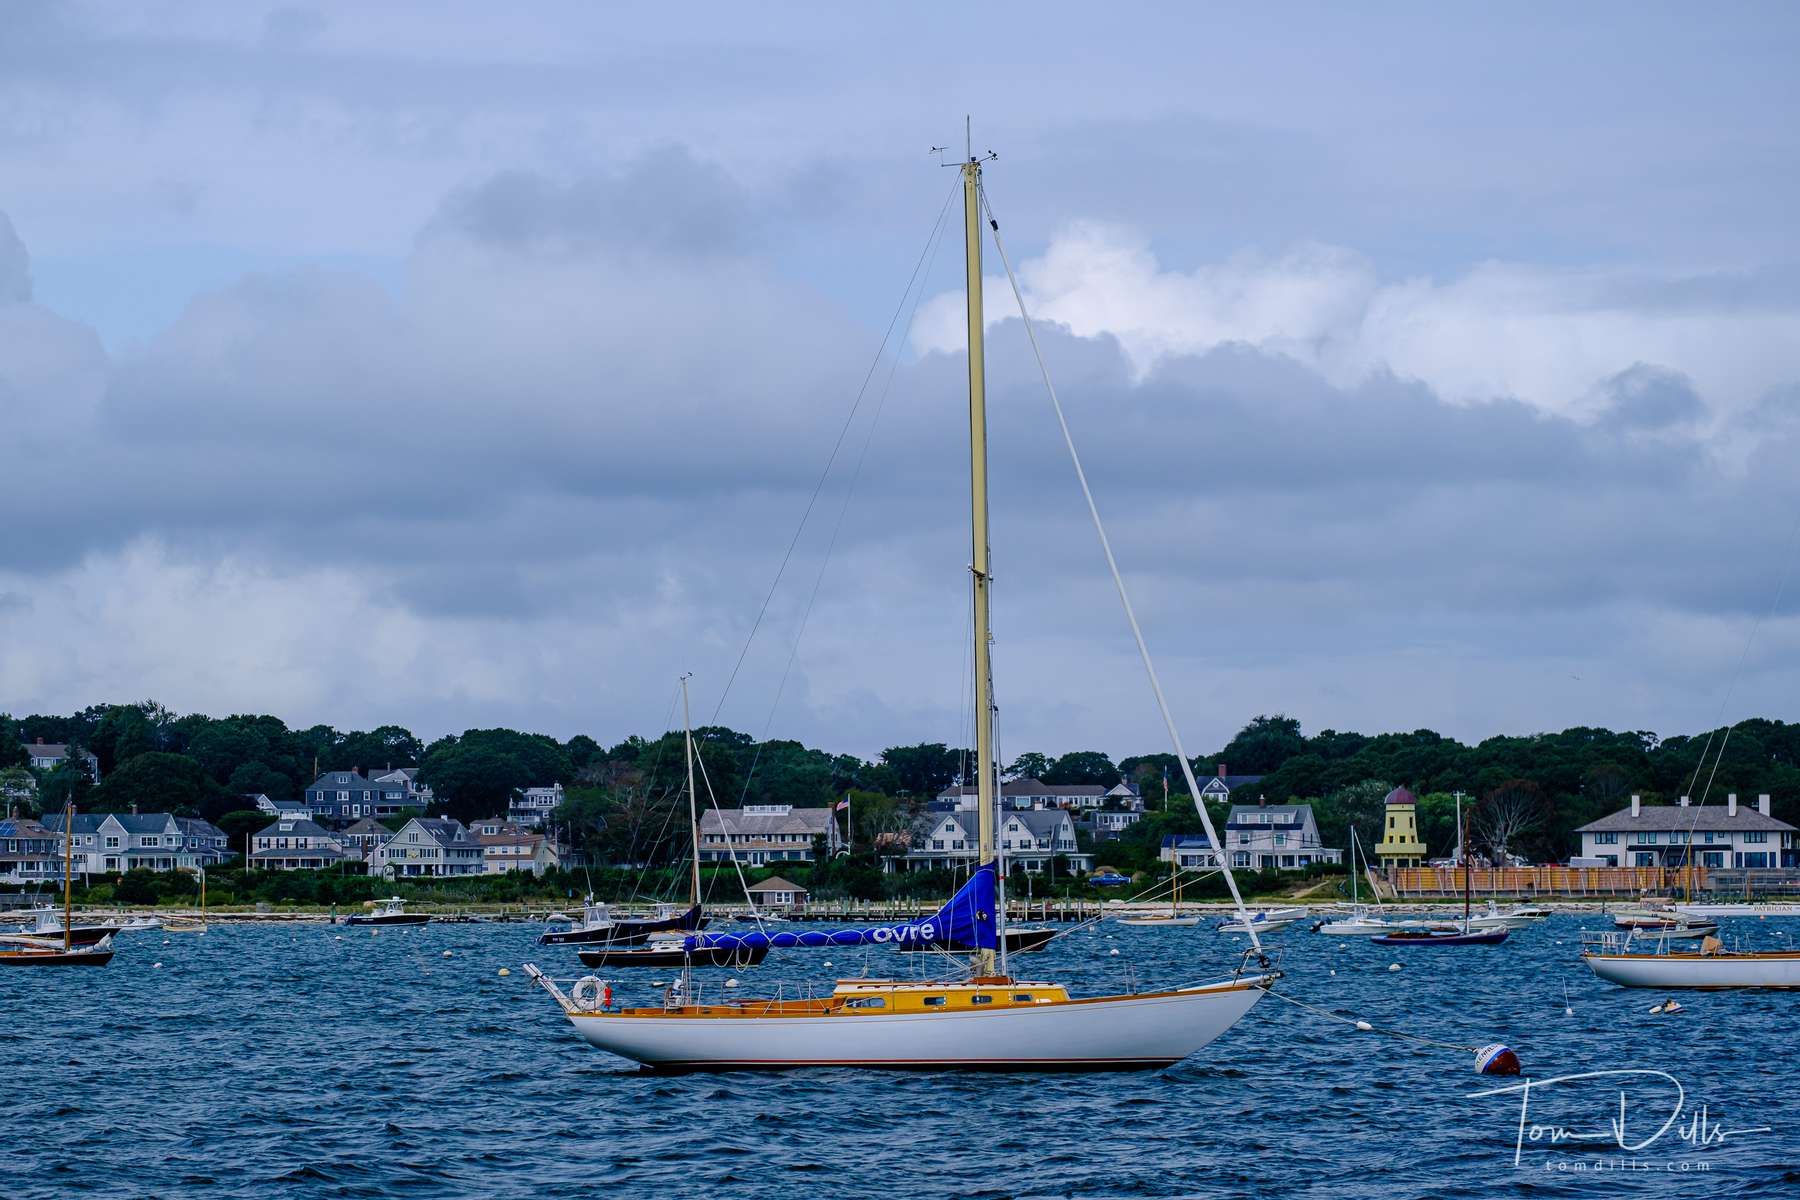 Unidentified sailboat moored to a {quote}Kennedy{quote} mooring ball off the coast of the Hyannis Port Yacht Club in Hyannis, Massachusetts